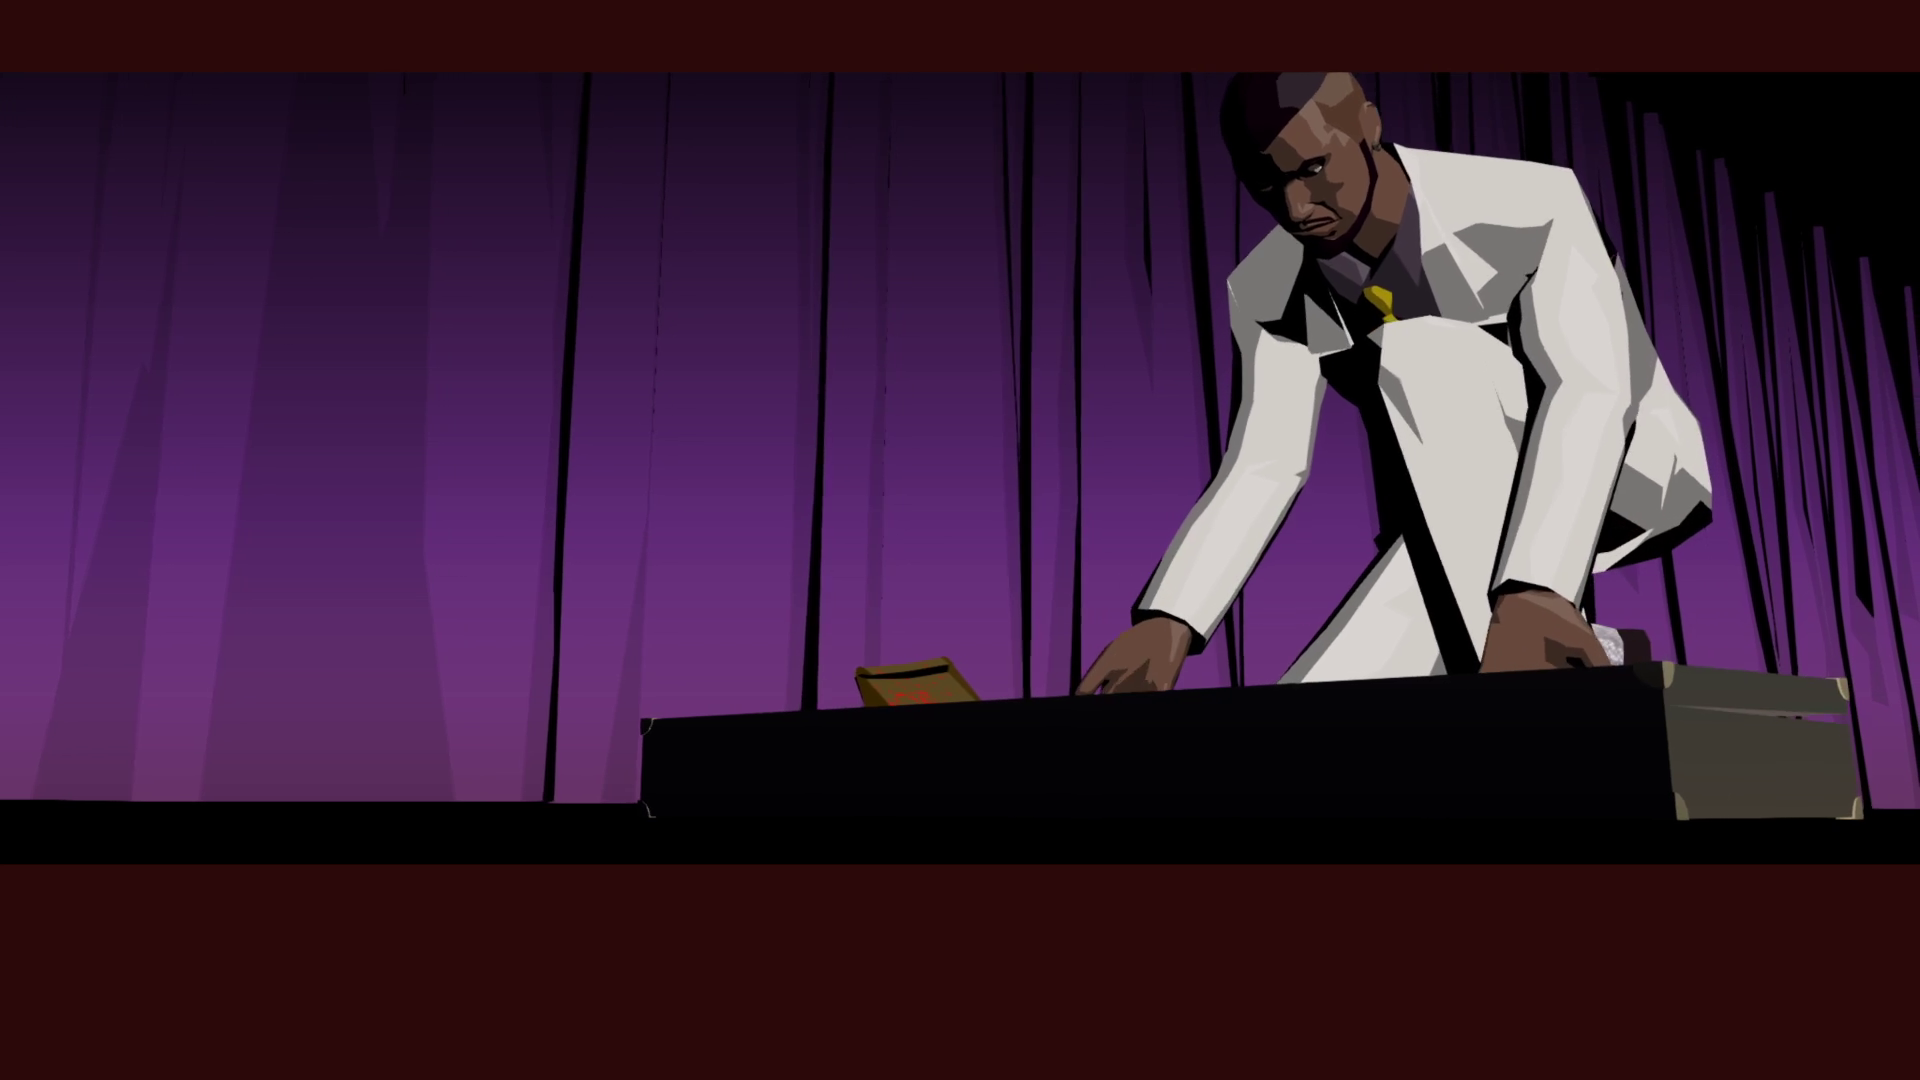 Screenshot of Garcian kneeling, opening his suitcase. Next to him is a bloody paperback of one of the other persona's flesh he is about to put into the suitcase. The background is a purple curtain.